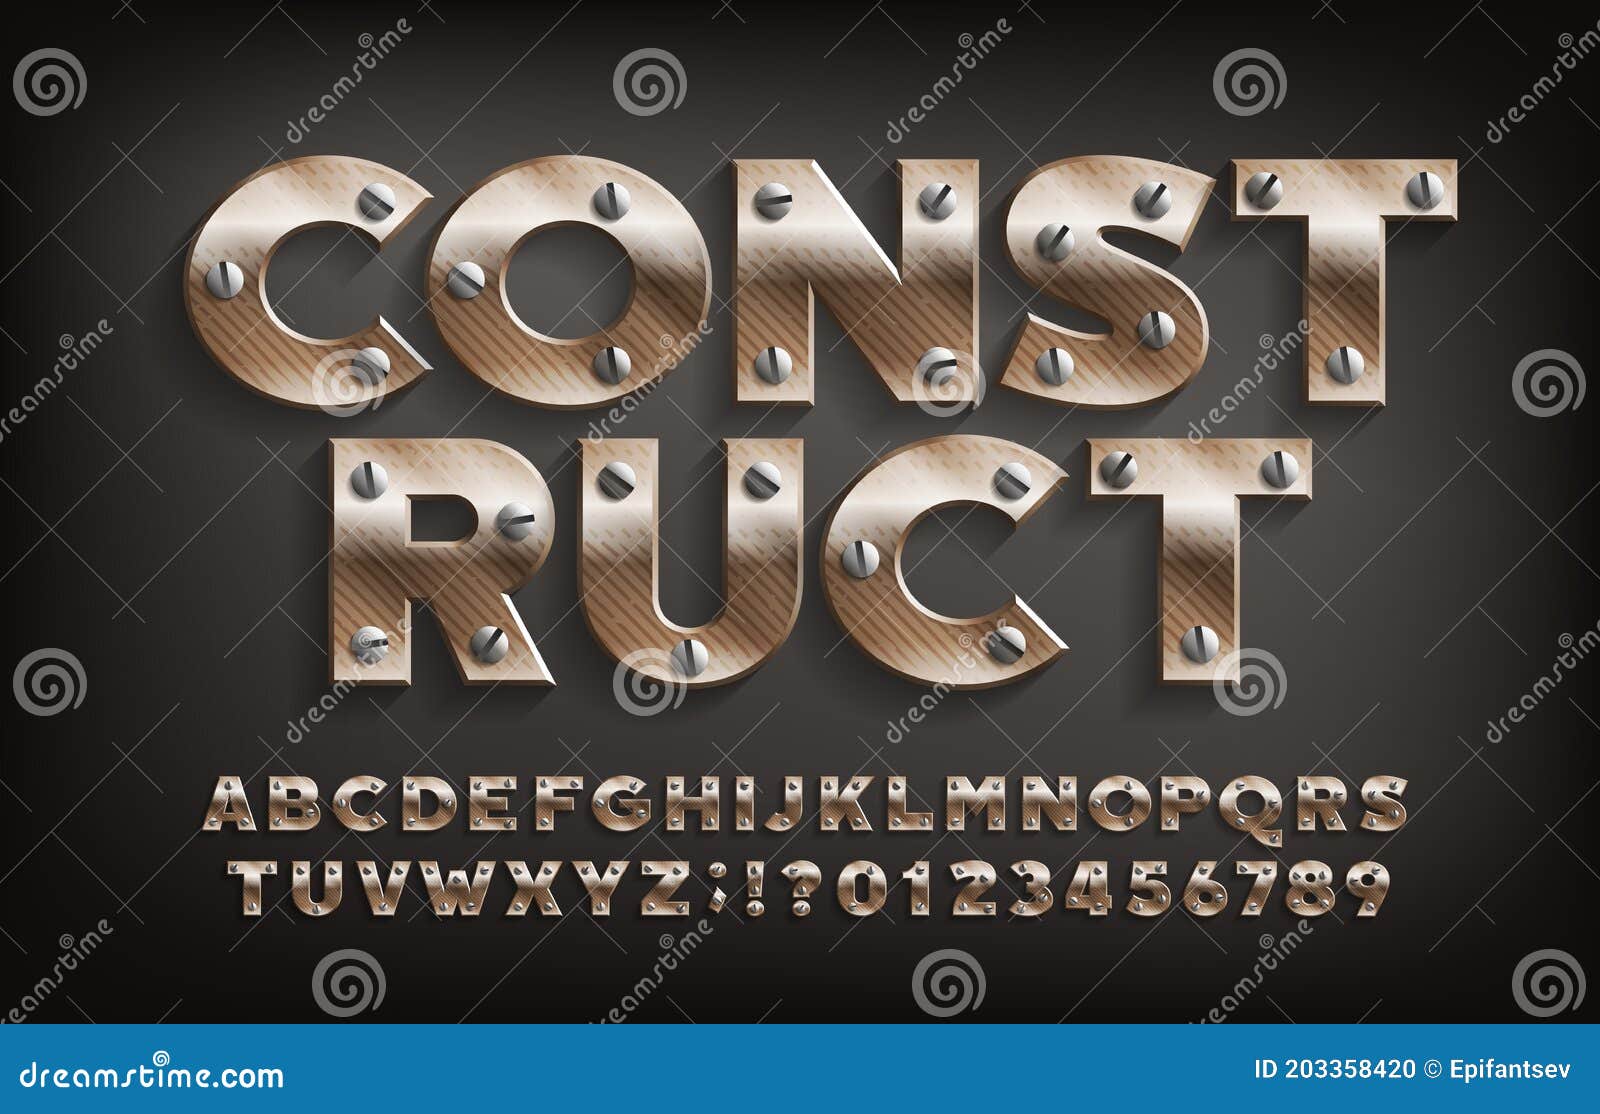 construct alphabet font. metallic letters and numbers with screws.